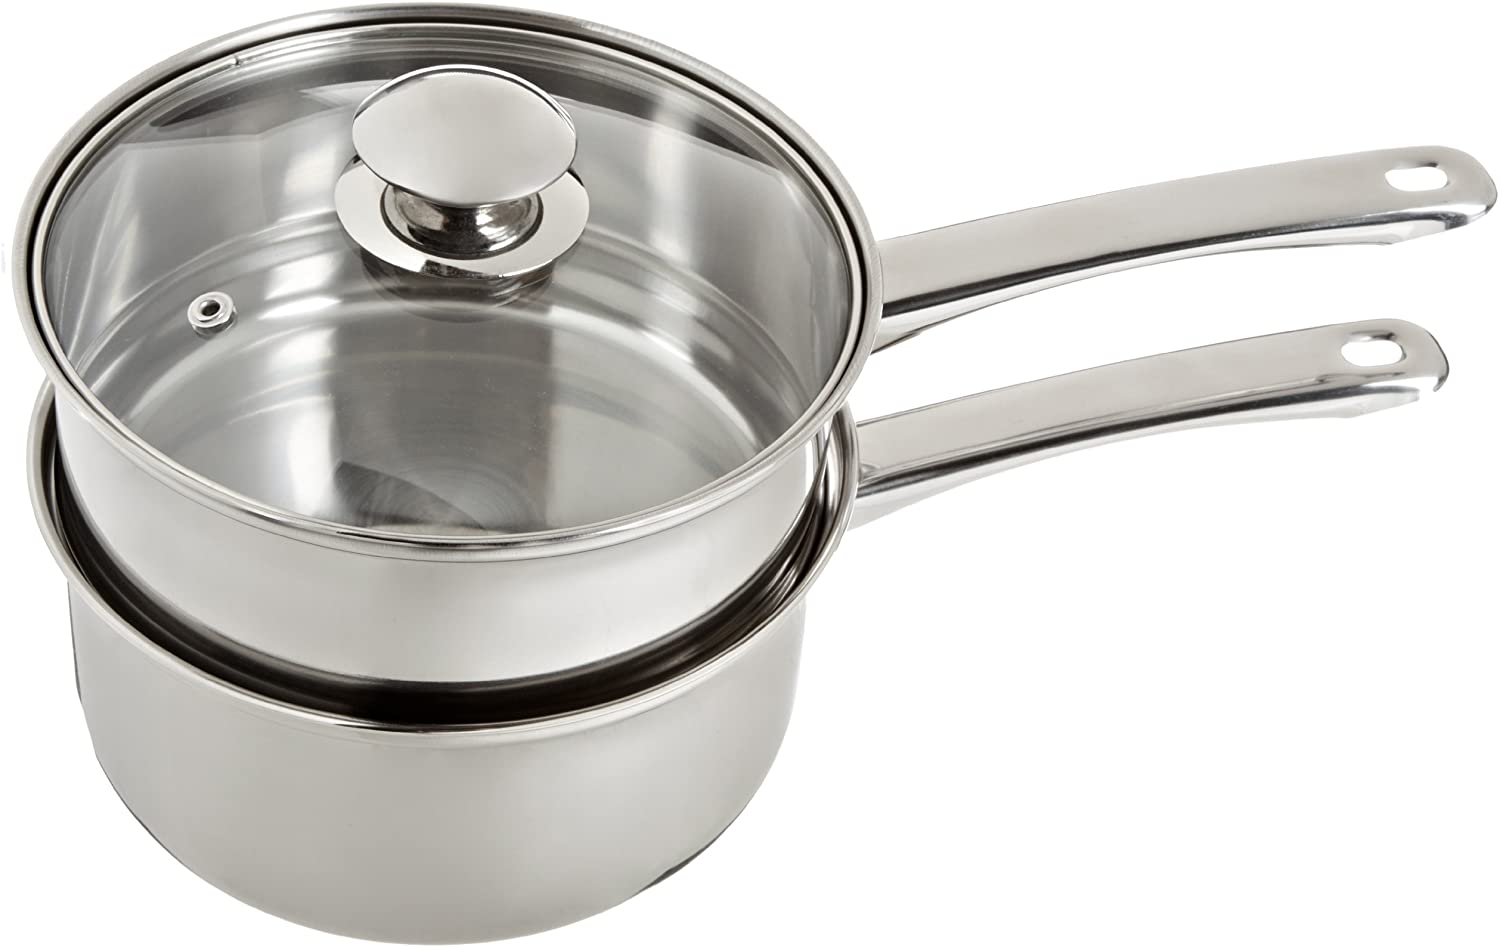 ExcelSteel Stainless Steel Double Boiler, 3-Piece, 2.5-Quart